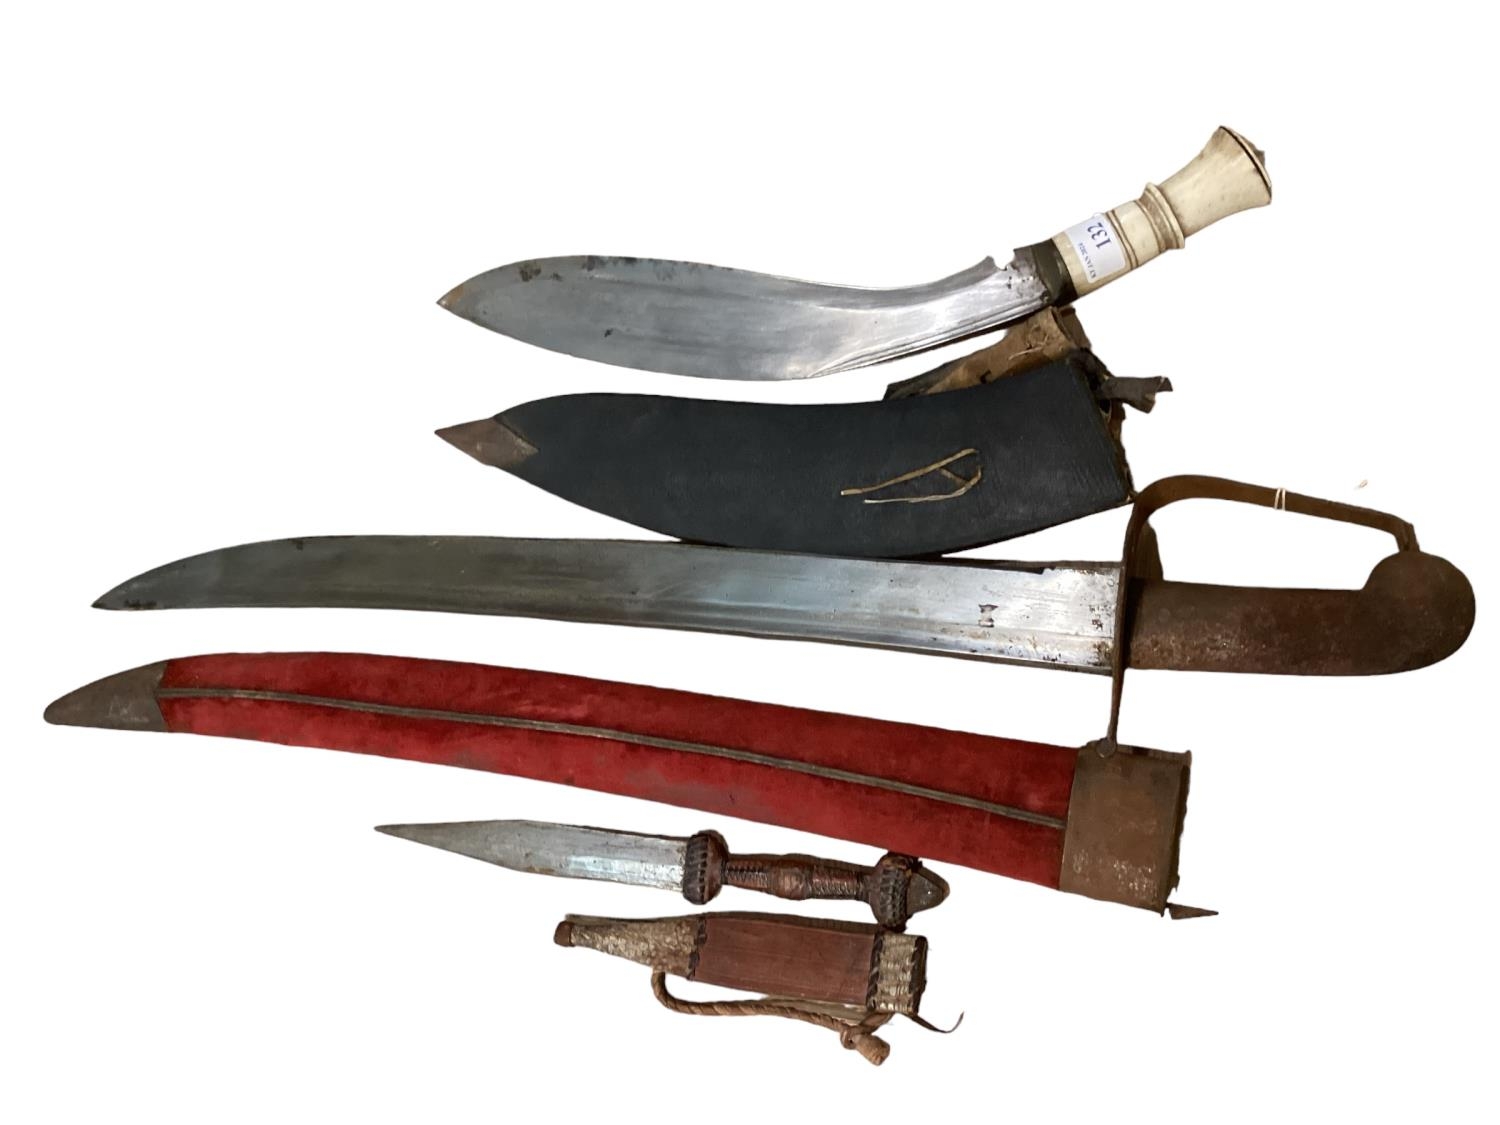 Three daggers, see images for condition and details